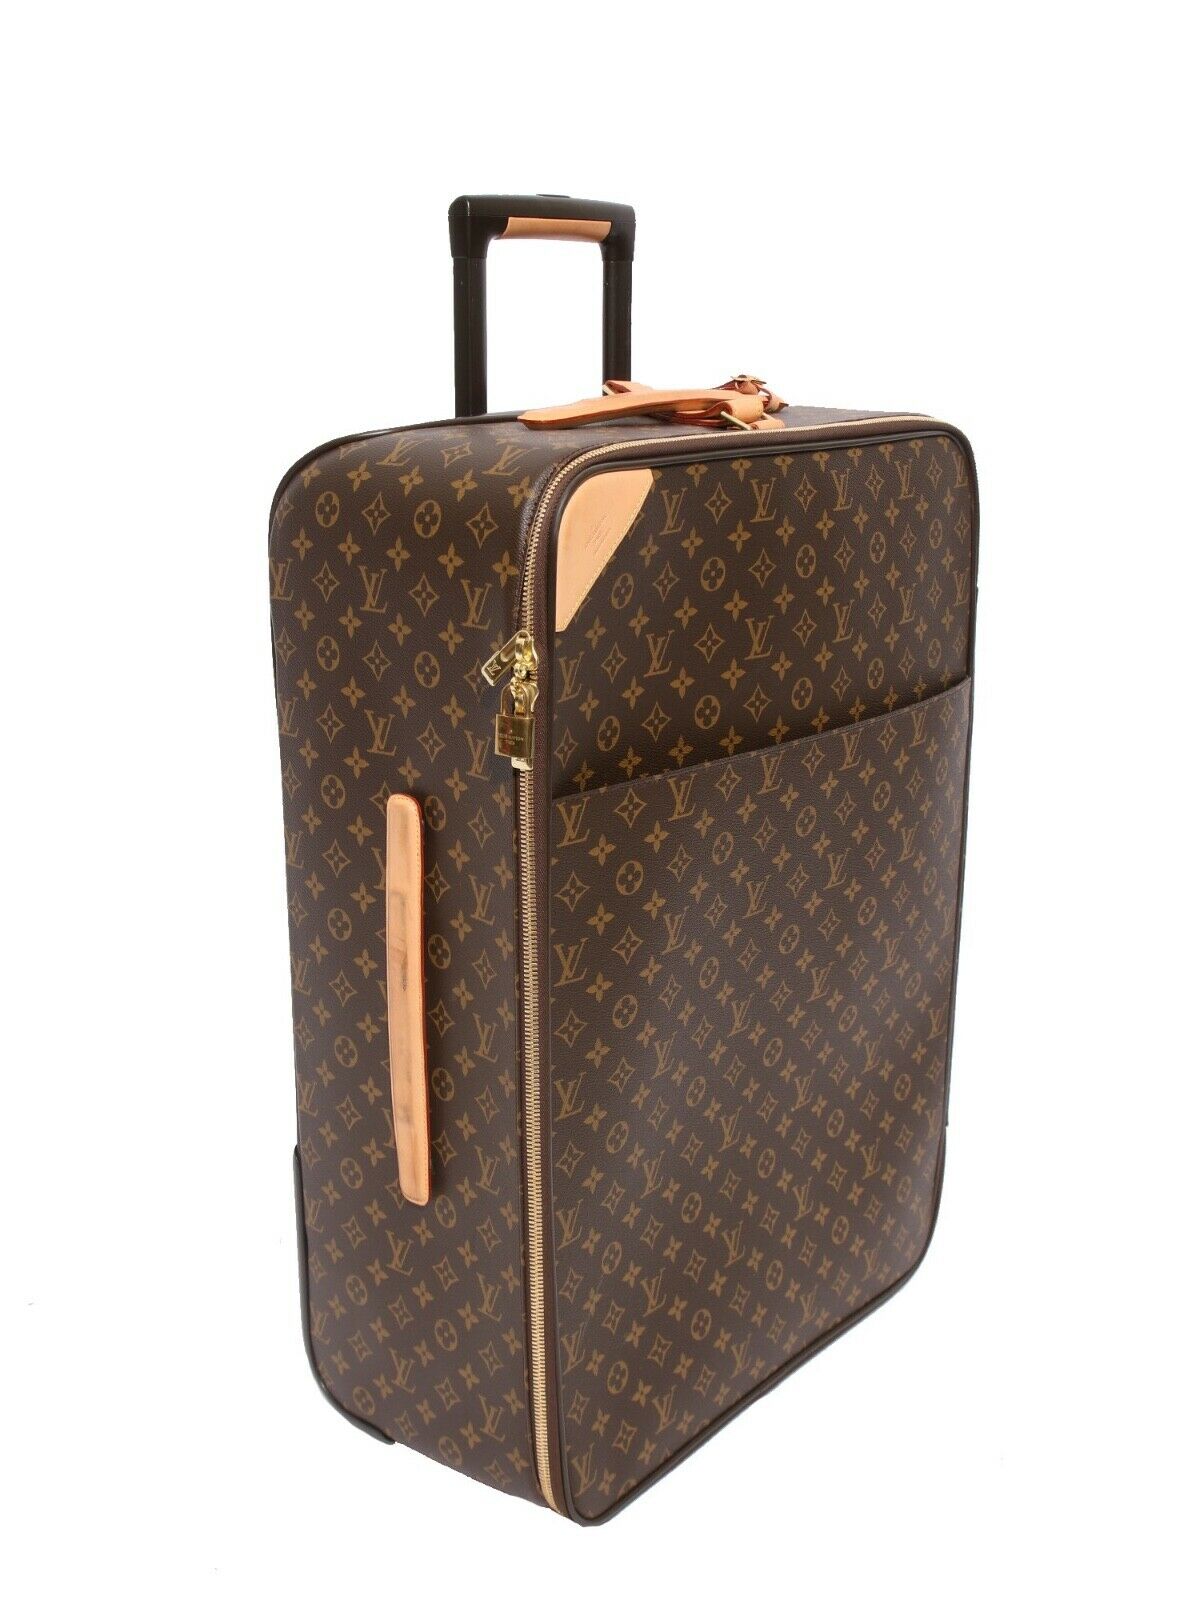 Louis Vuitton Large Monogram Suitcase Luggage With Combination